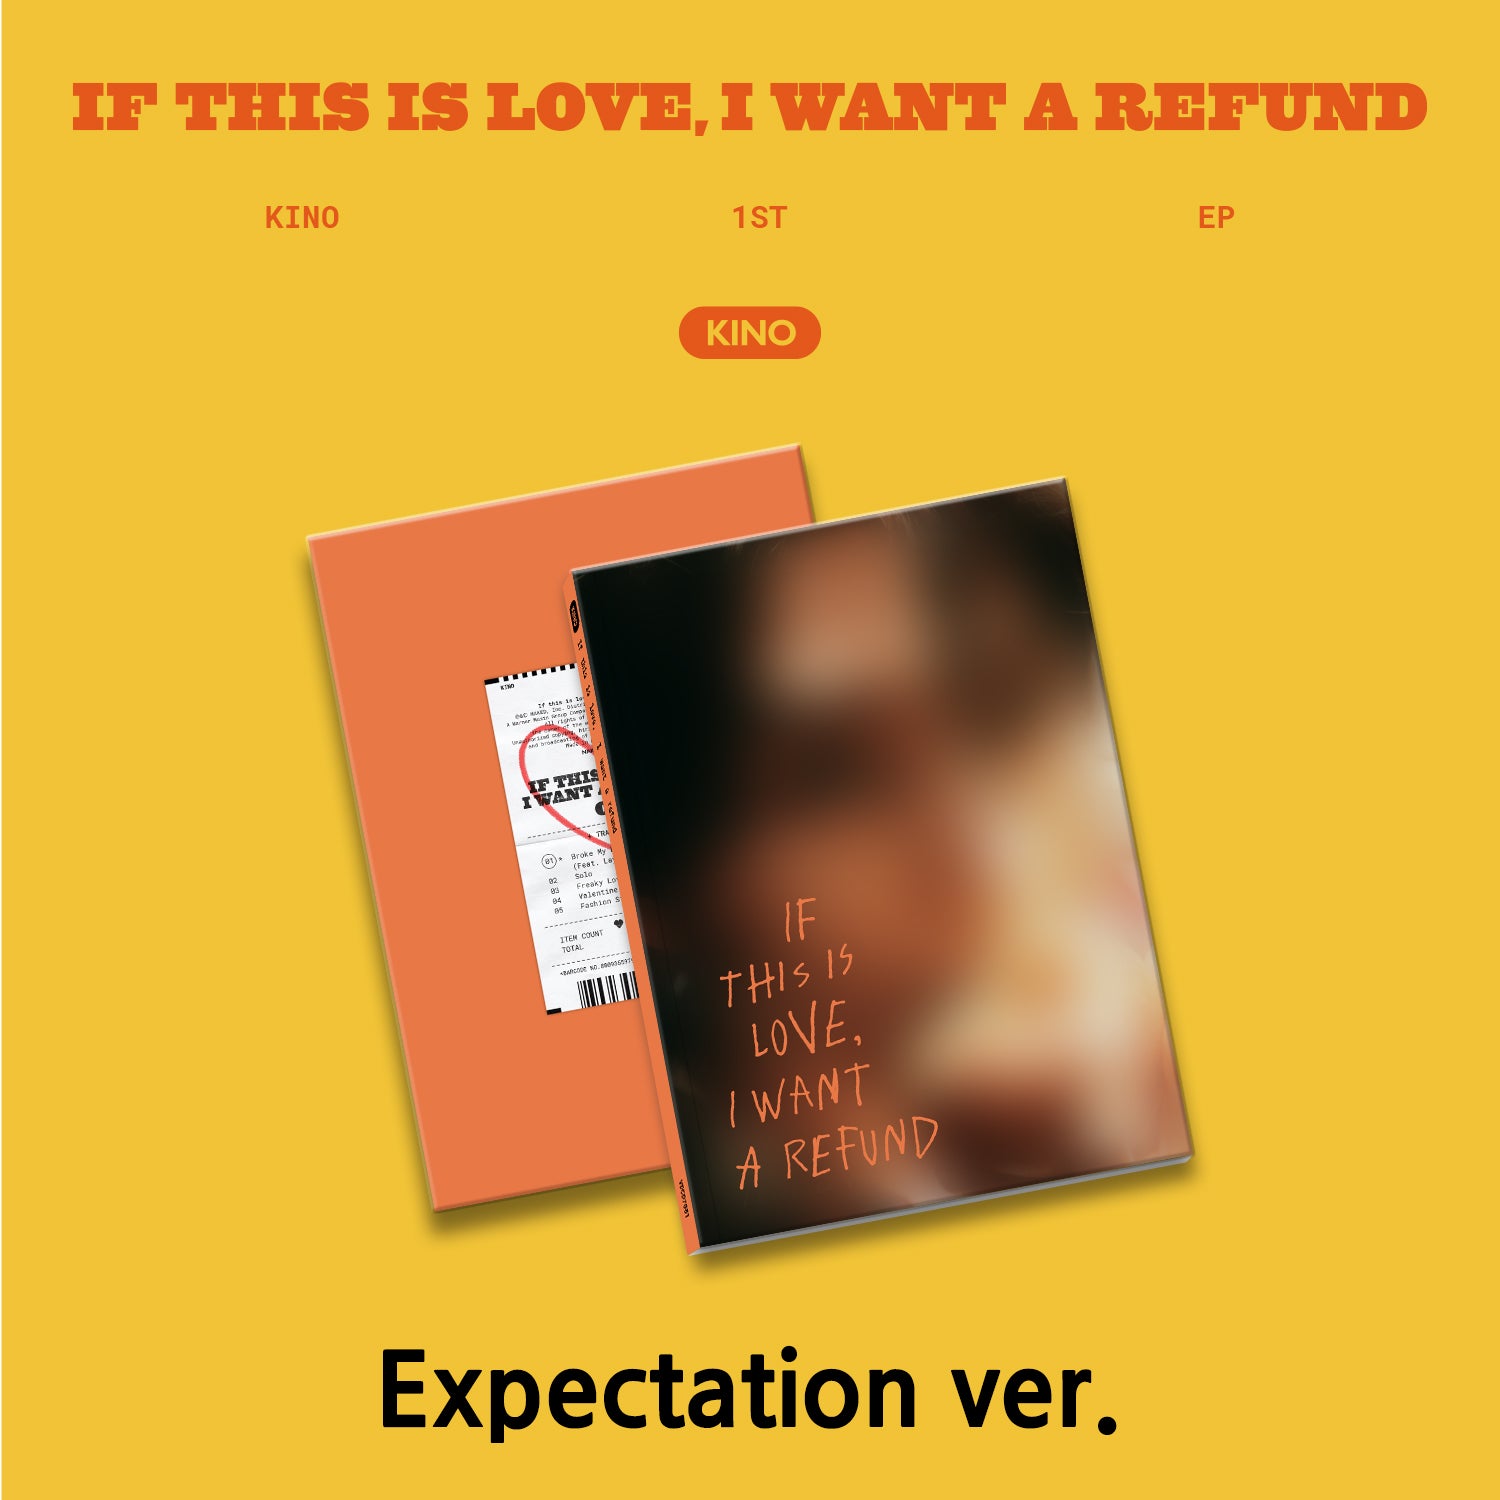 KINO 1ST EP - IF THIS IS LOVE, I WANT A REFUND